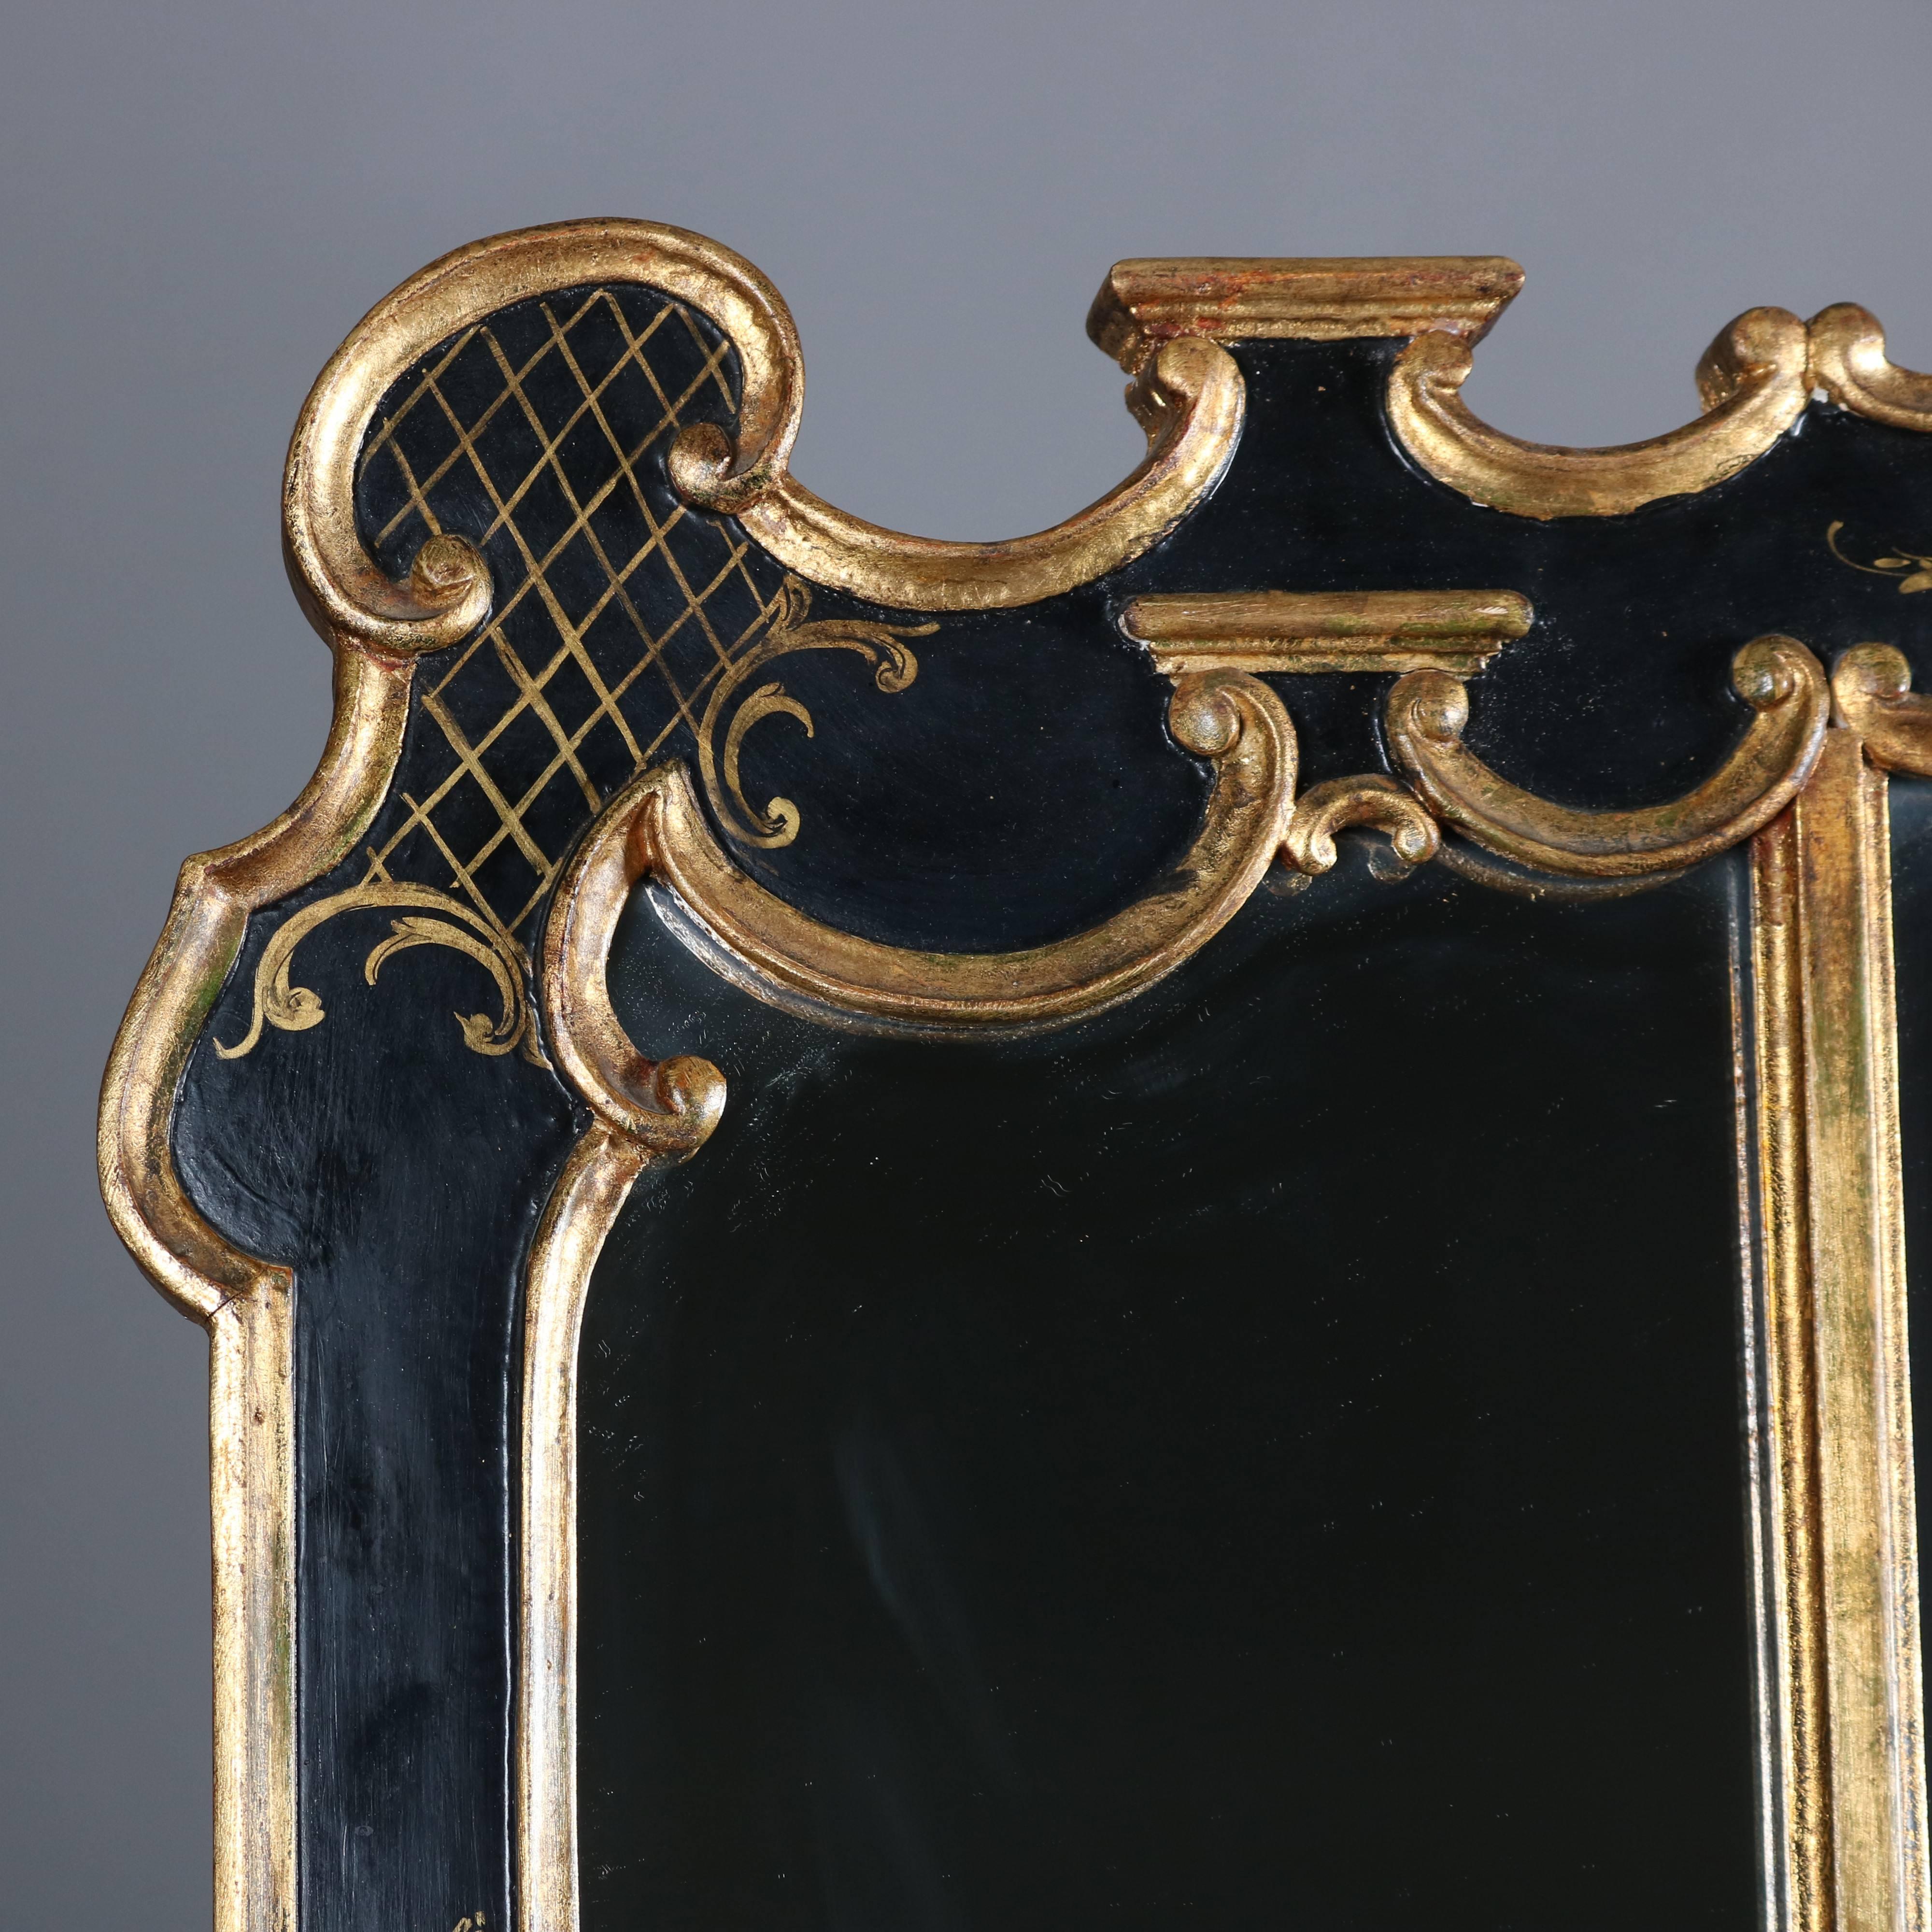 Antique chinoiserie triptych over mantel mirror features ebonized frame with gilt hand-painted flowers and bordering, 19th century

Measures - fr: 37.5" H x 49" W x 1.75" D, los: 30" H x 42" W.